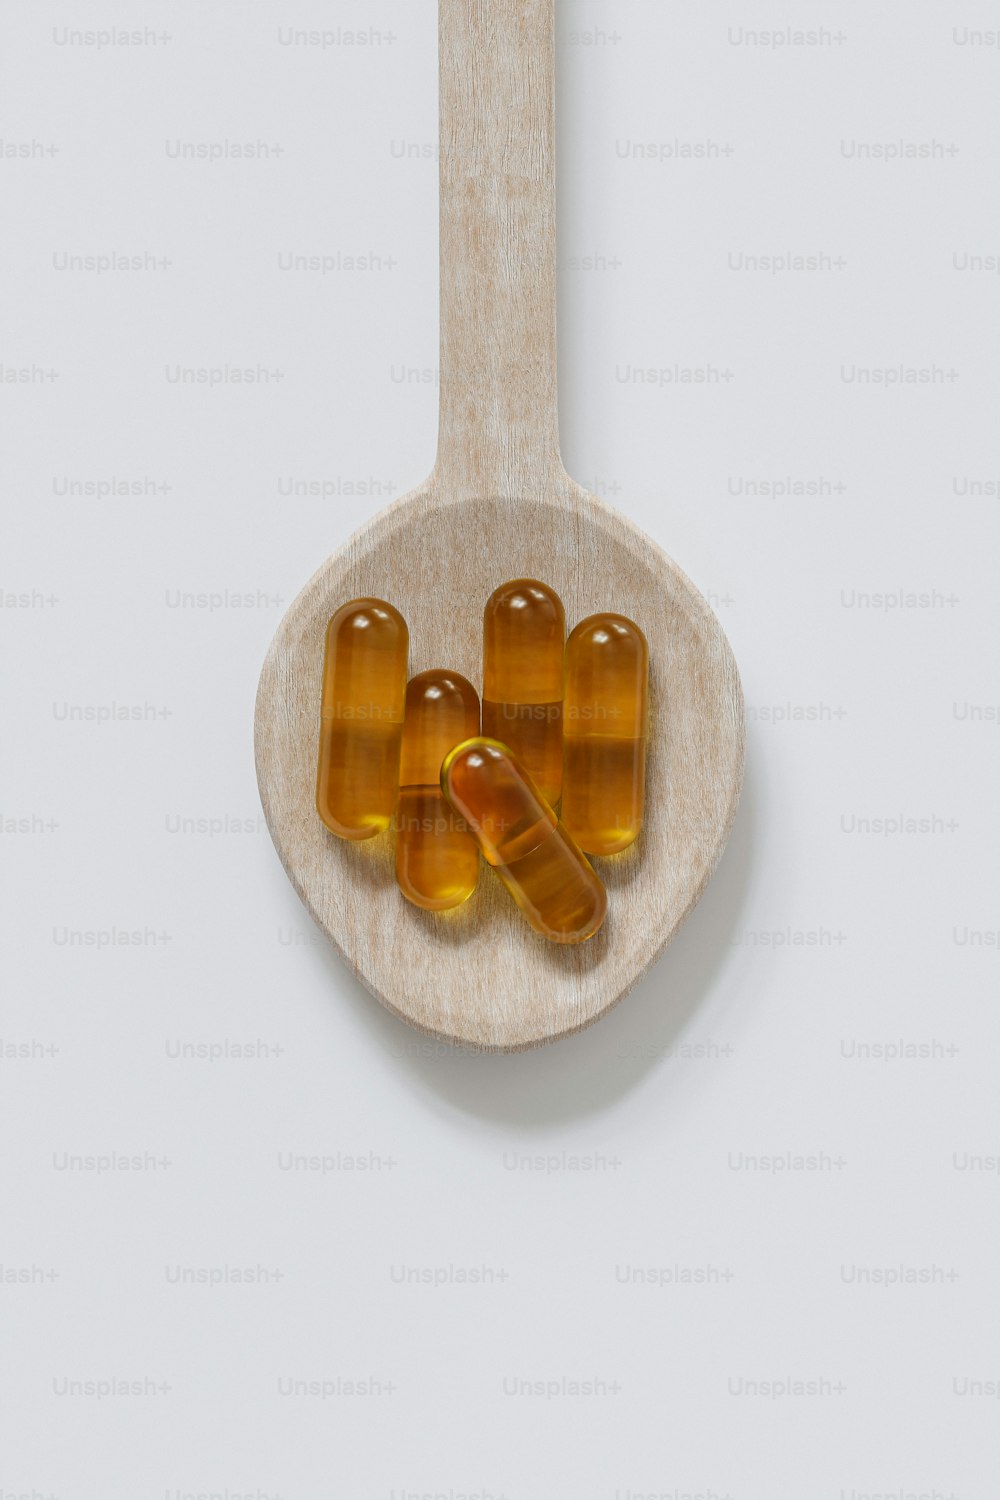 a spoon with some pills on it